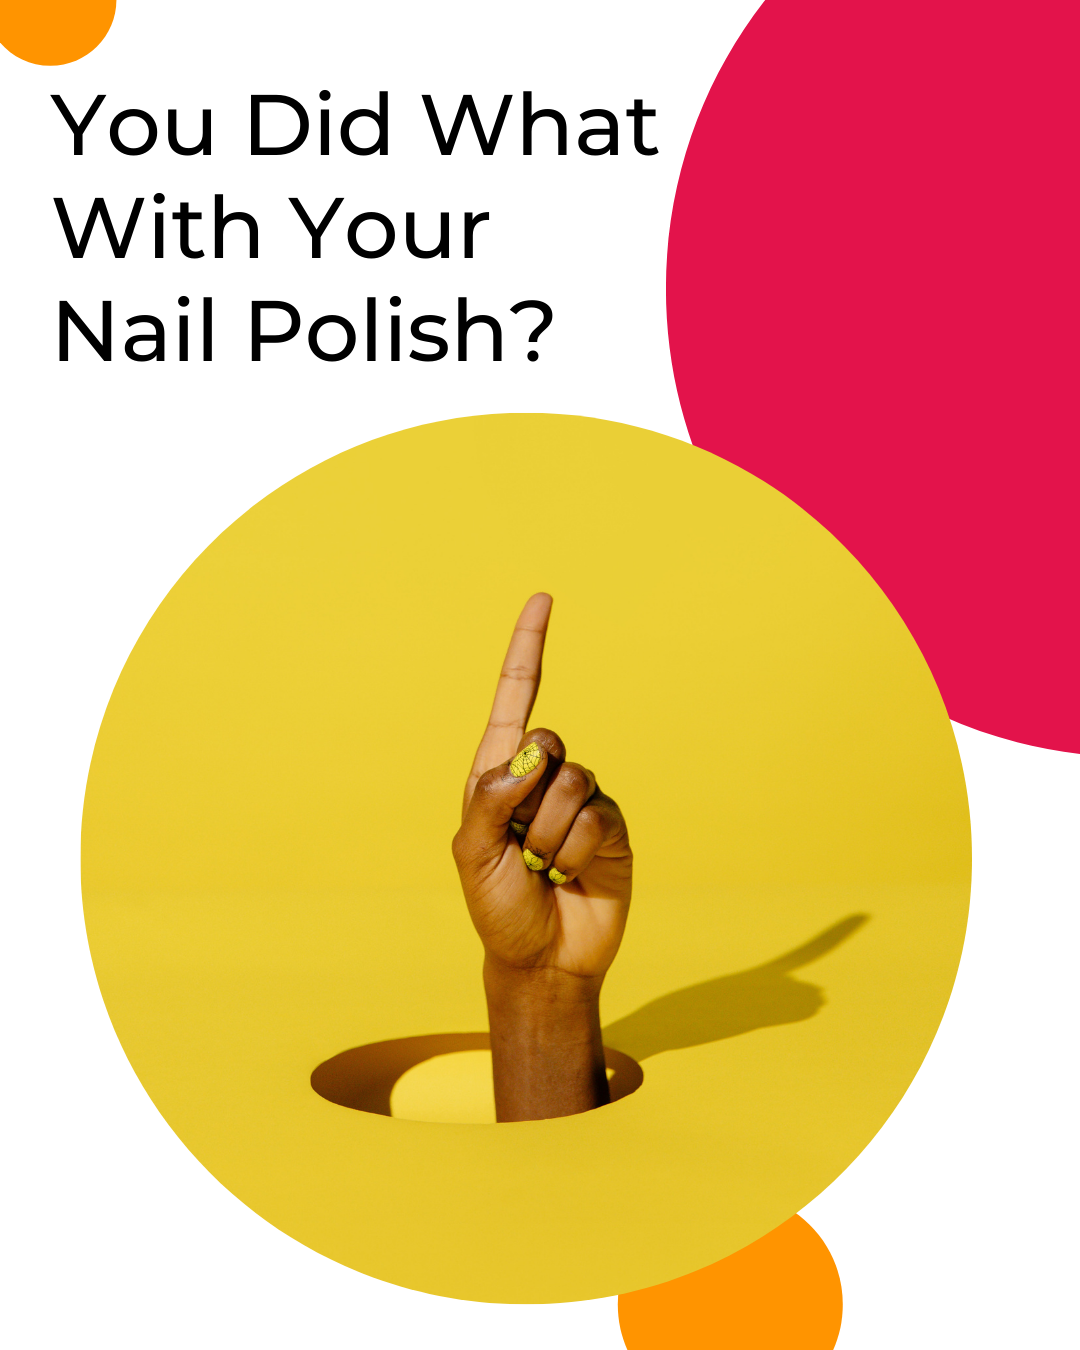 Top Unconventional Uses for Nail Polish